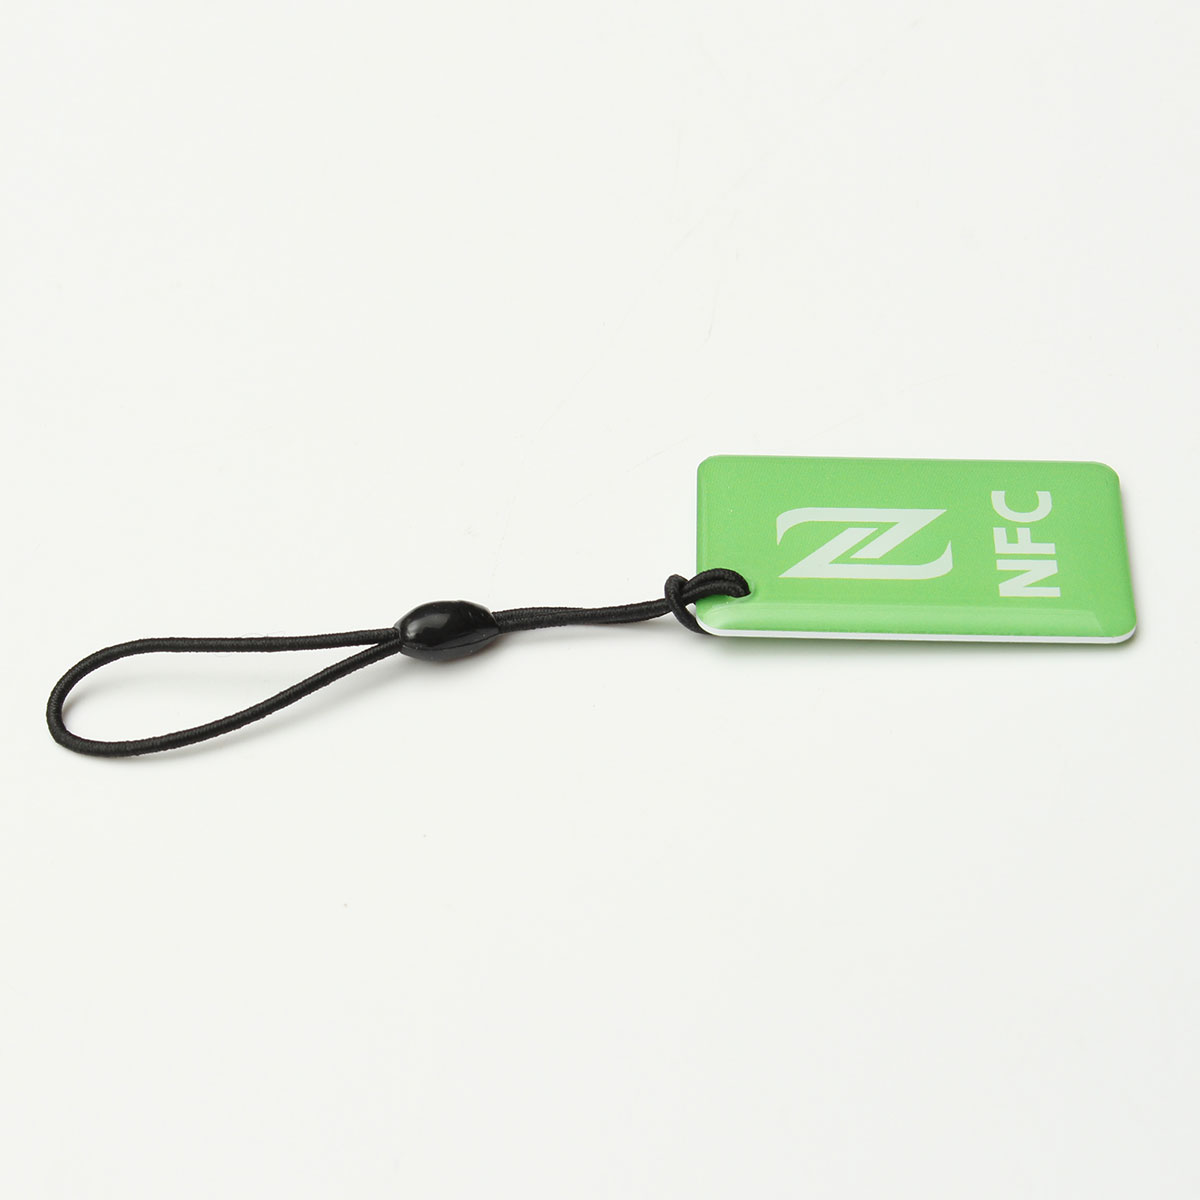 4pcs-Smart-NFC-Tag-Universal-888-Byte-For-Xiaomi-HTC-Samsung-Android-Smartphone-1100152